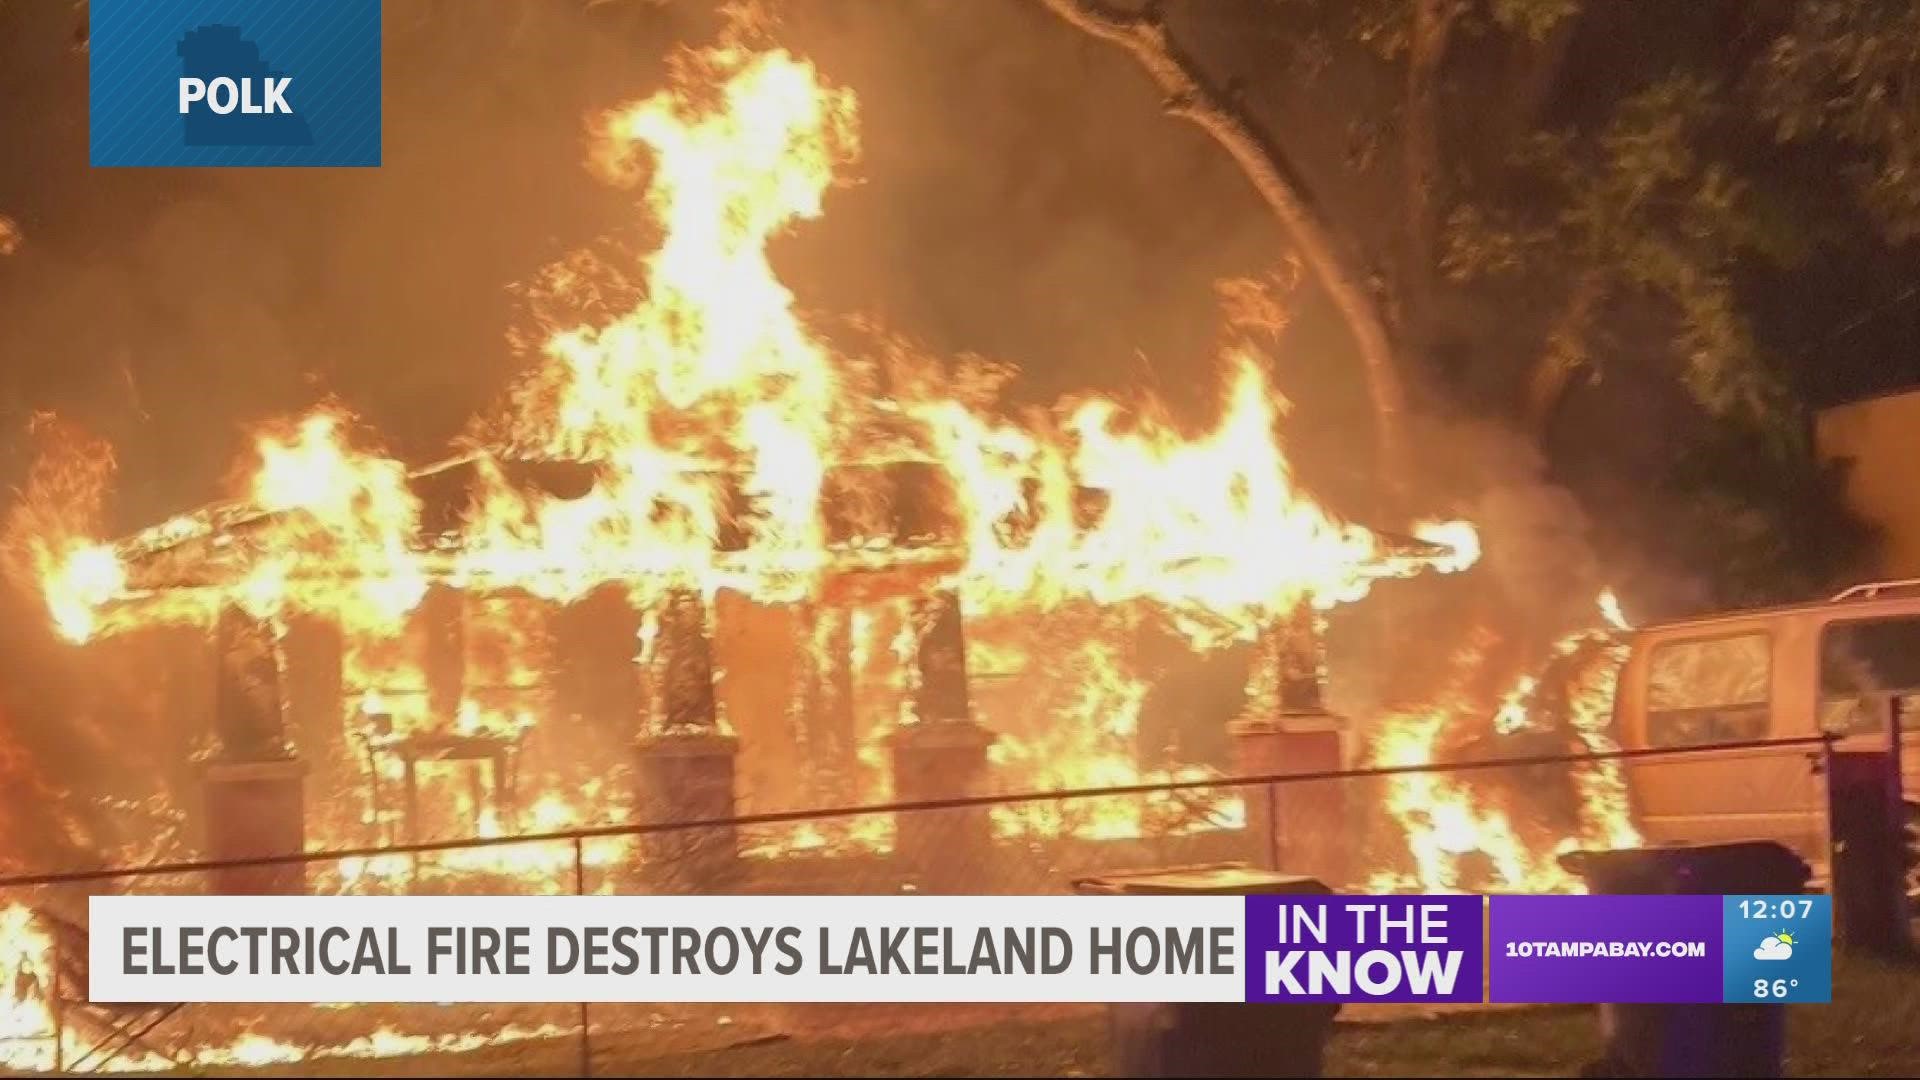 The flames were under control in less than 20 minutes, the Lakeland Fire Department said.